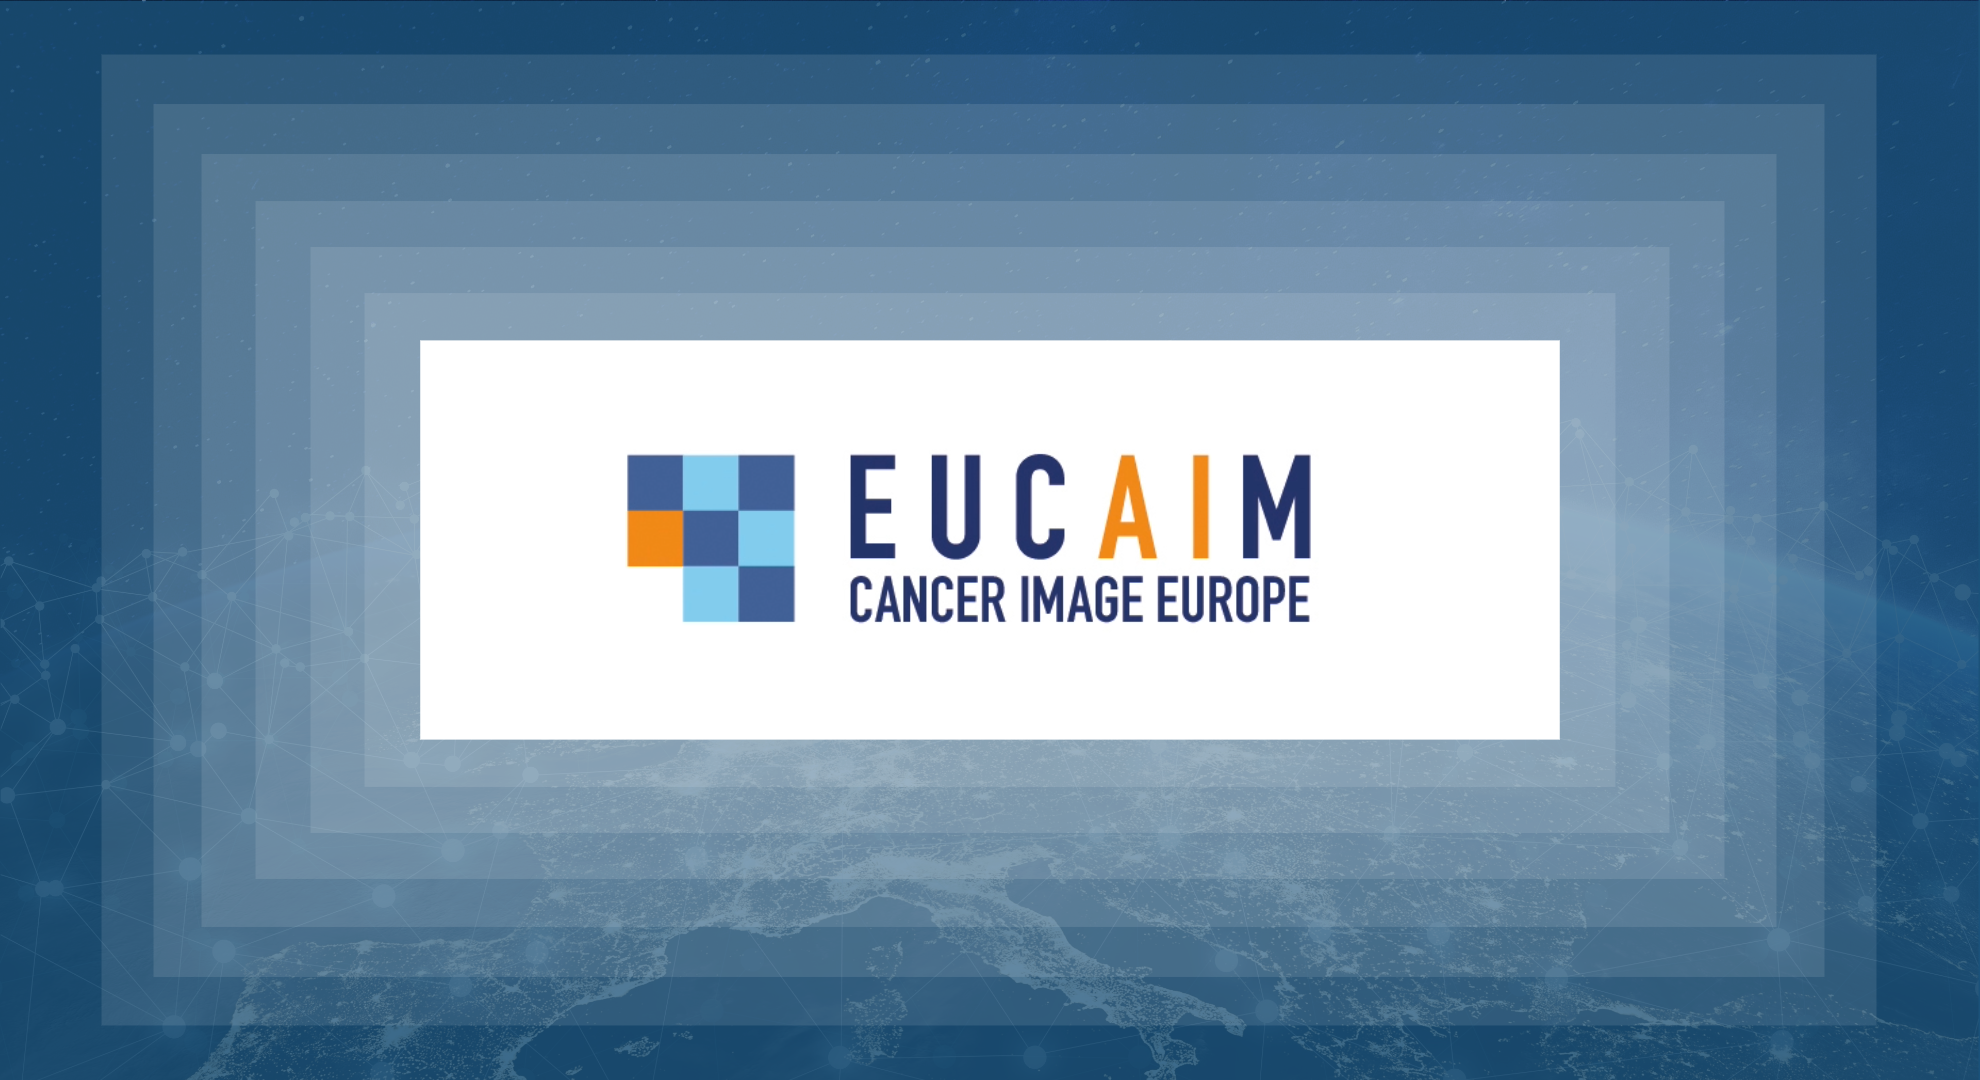 Discover Cancer Image Europe, the first release of the EUCAIM platform to fuel cancer research and data sharing thumbnail